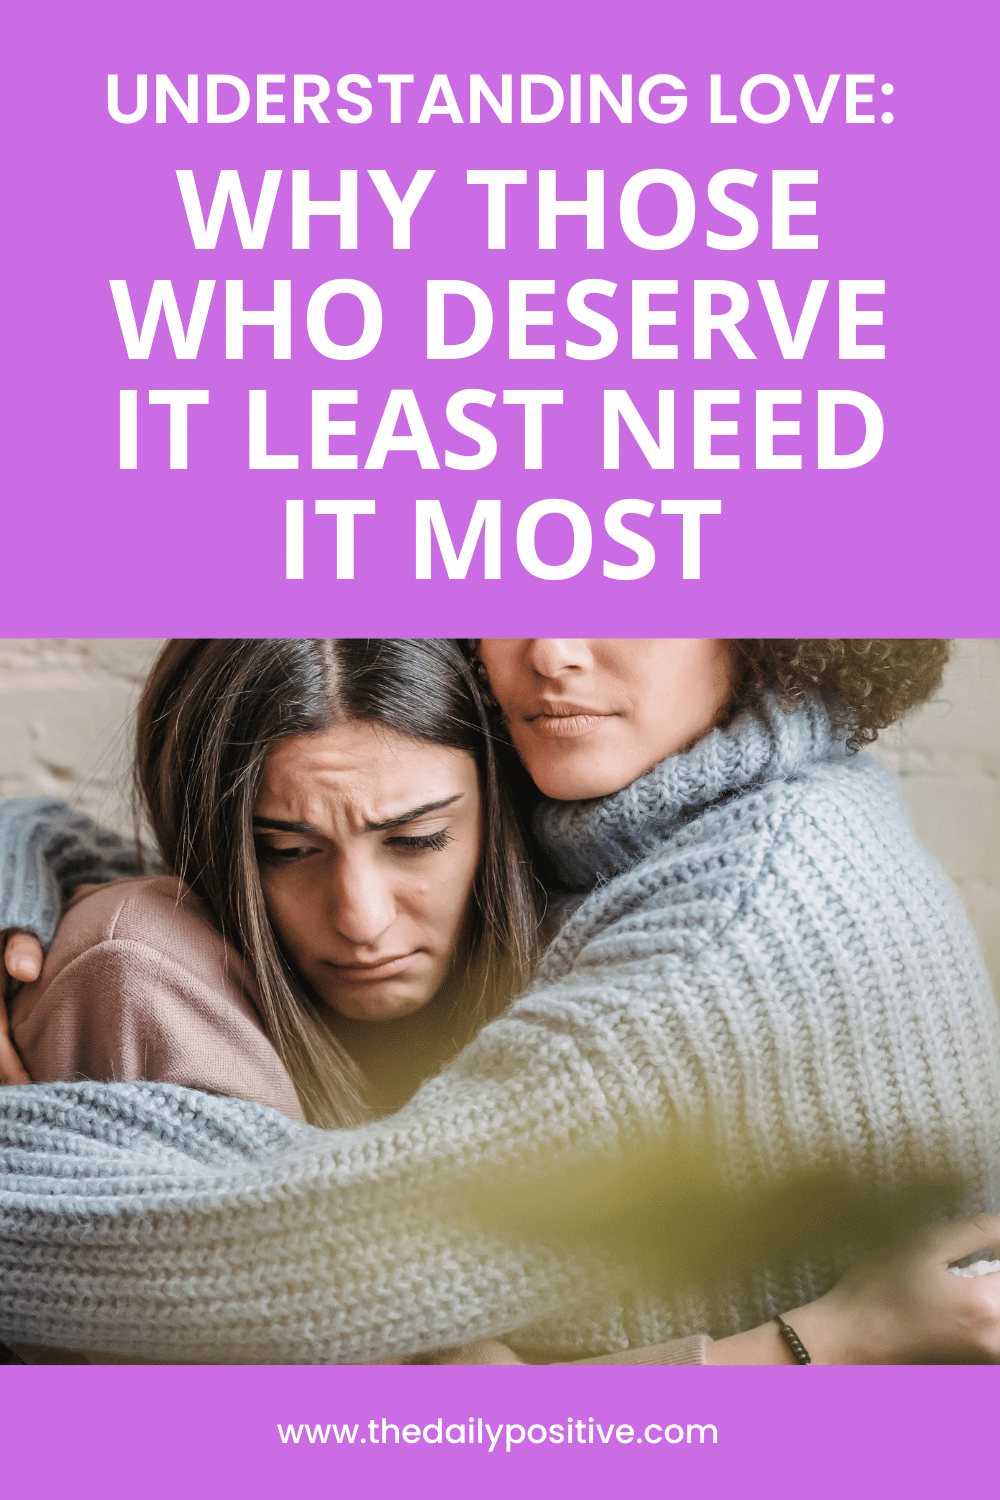 Understanding Love: Why Those Who Deserve It Least Need It Most